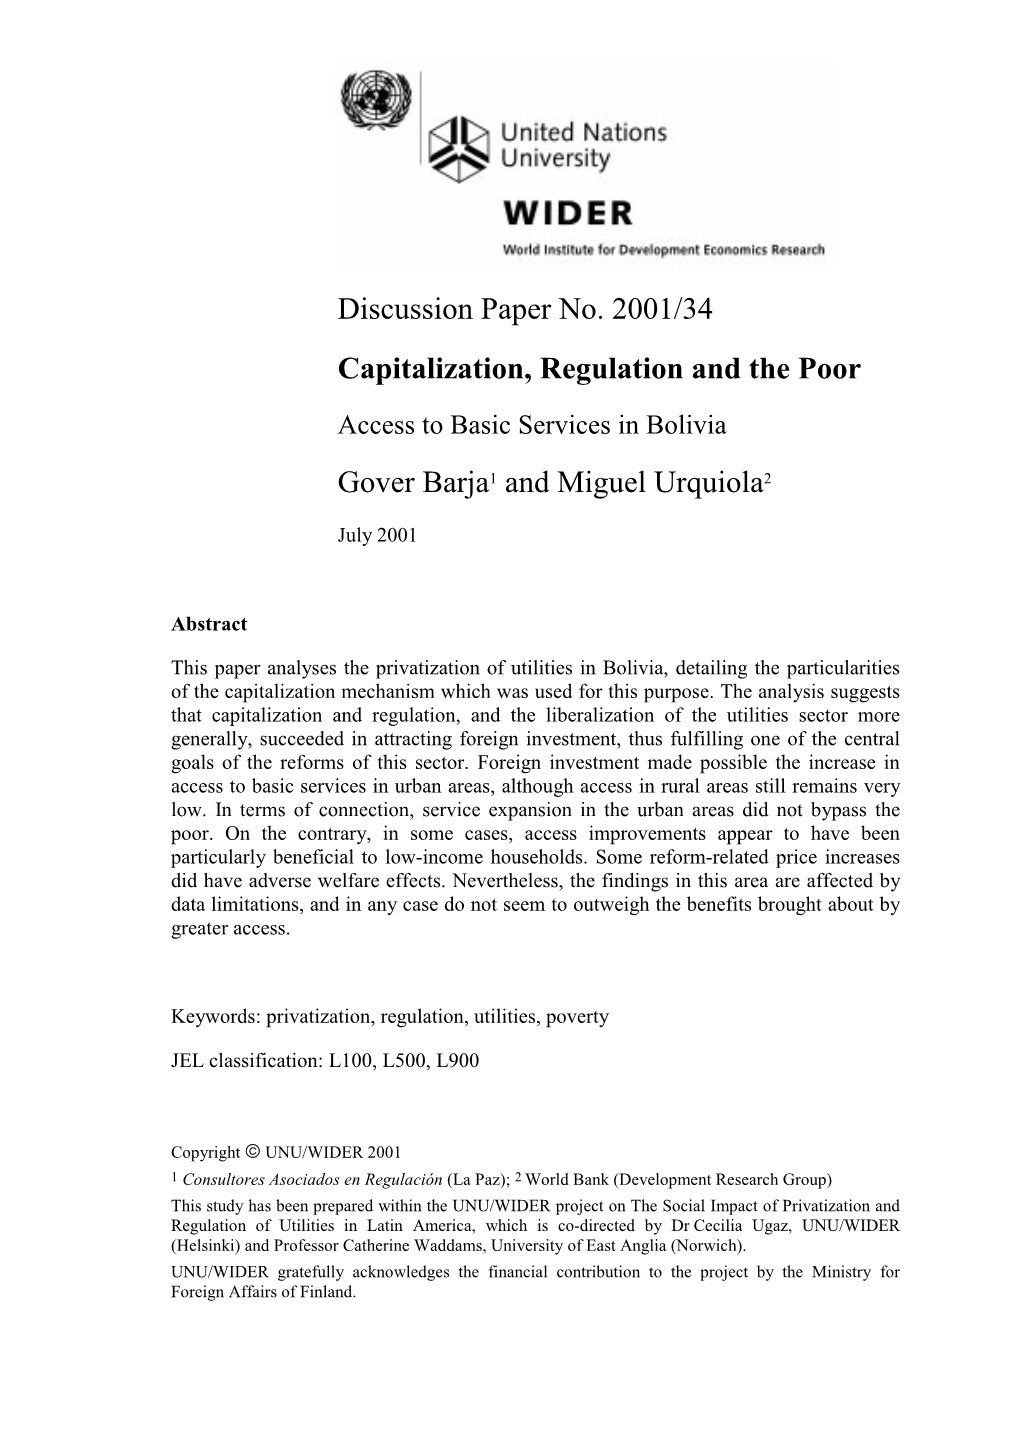 Capitalization, Regulation and the Poor Access to Basic Services in Bolivia